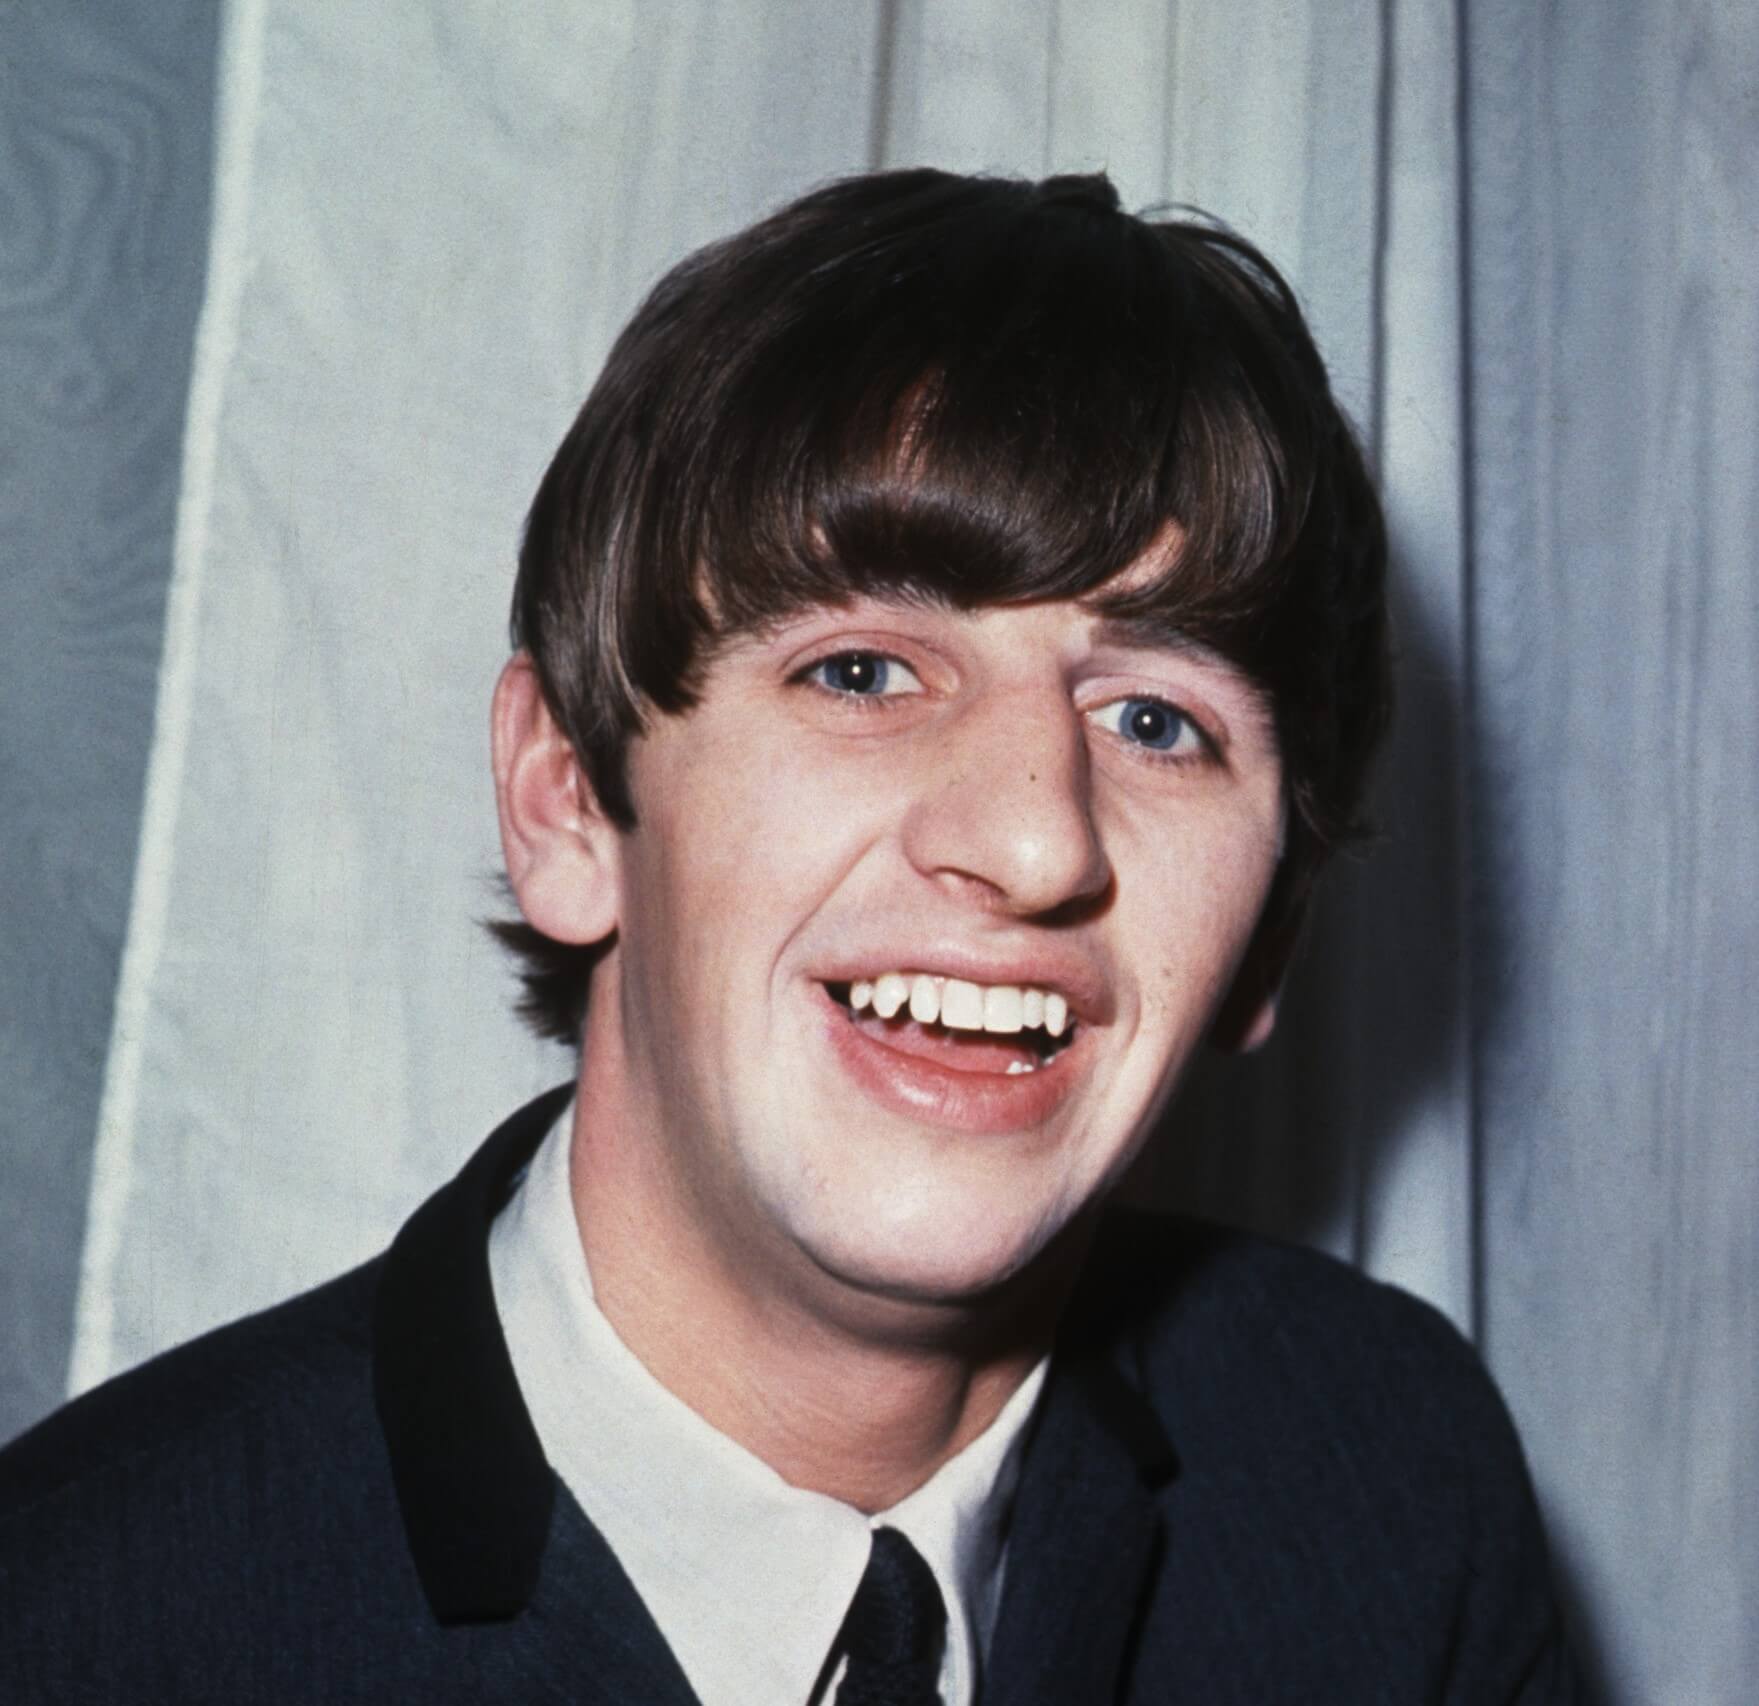 The Beatles' Ringo Starr in front of a curtain